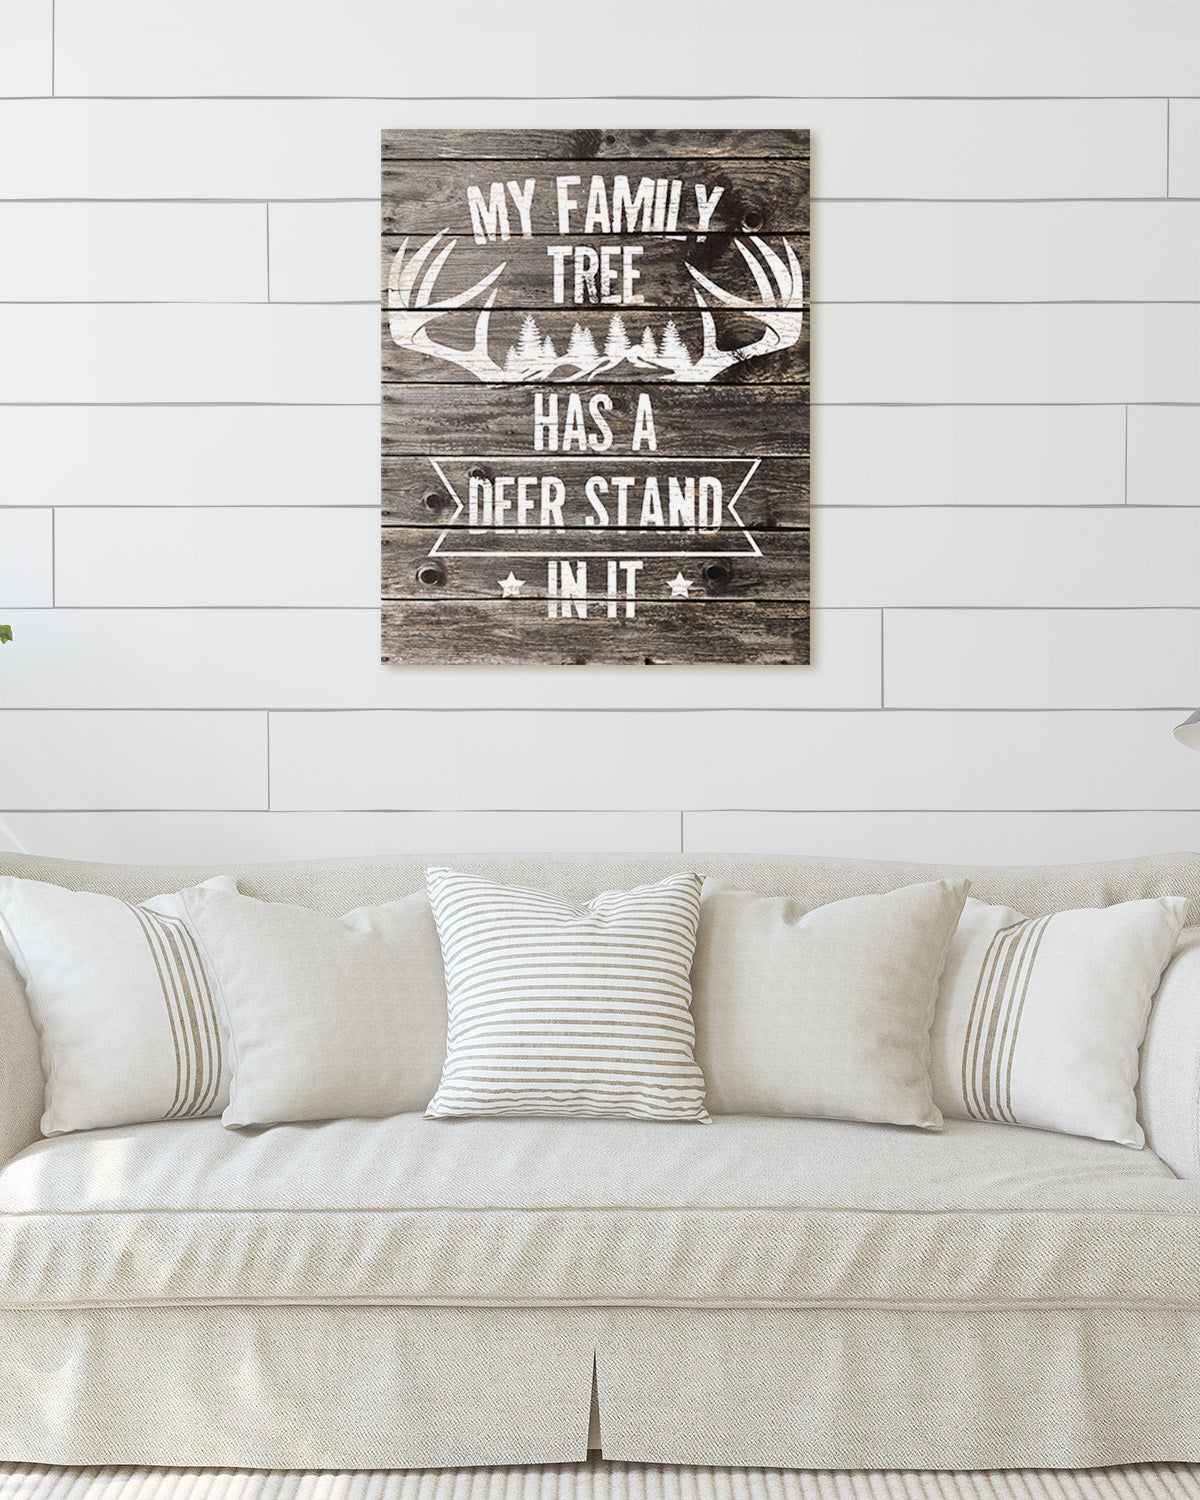 The Hunter's Prayer Canvas - Hunting Quote Wall Decor Art Print with a brown background - artwork printed on canvas